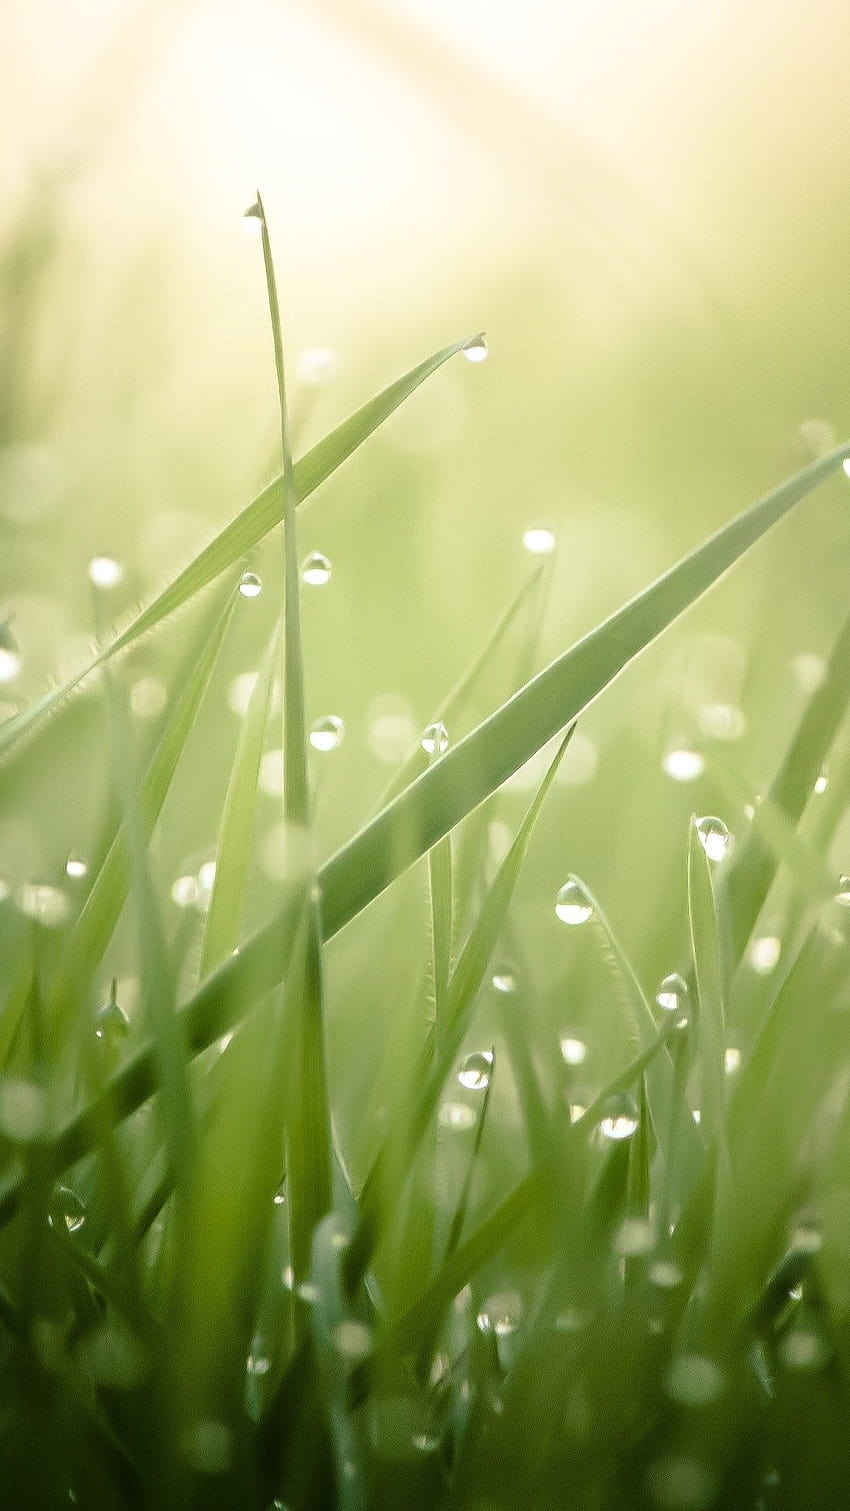 Water drop and grass. Pretty water drops/morning dews iPhone, grass mobile HD phone wallpaper